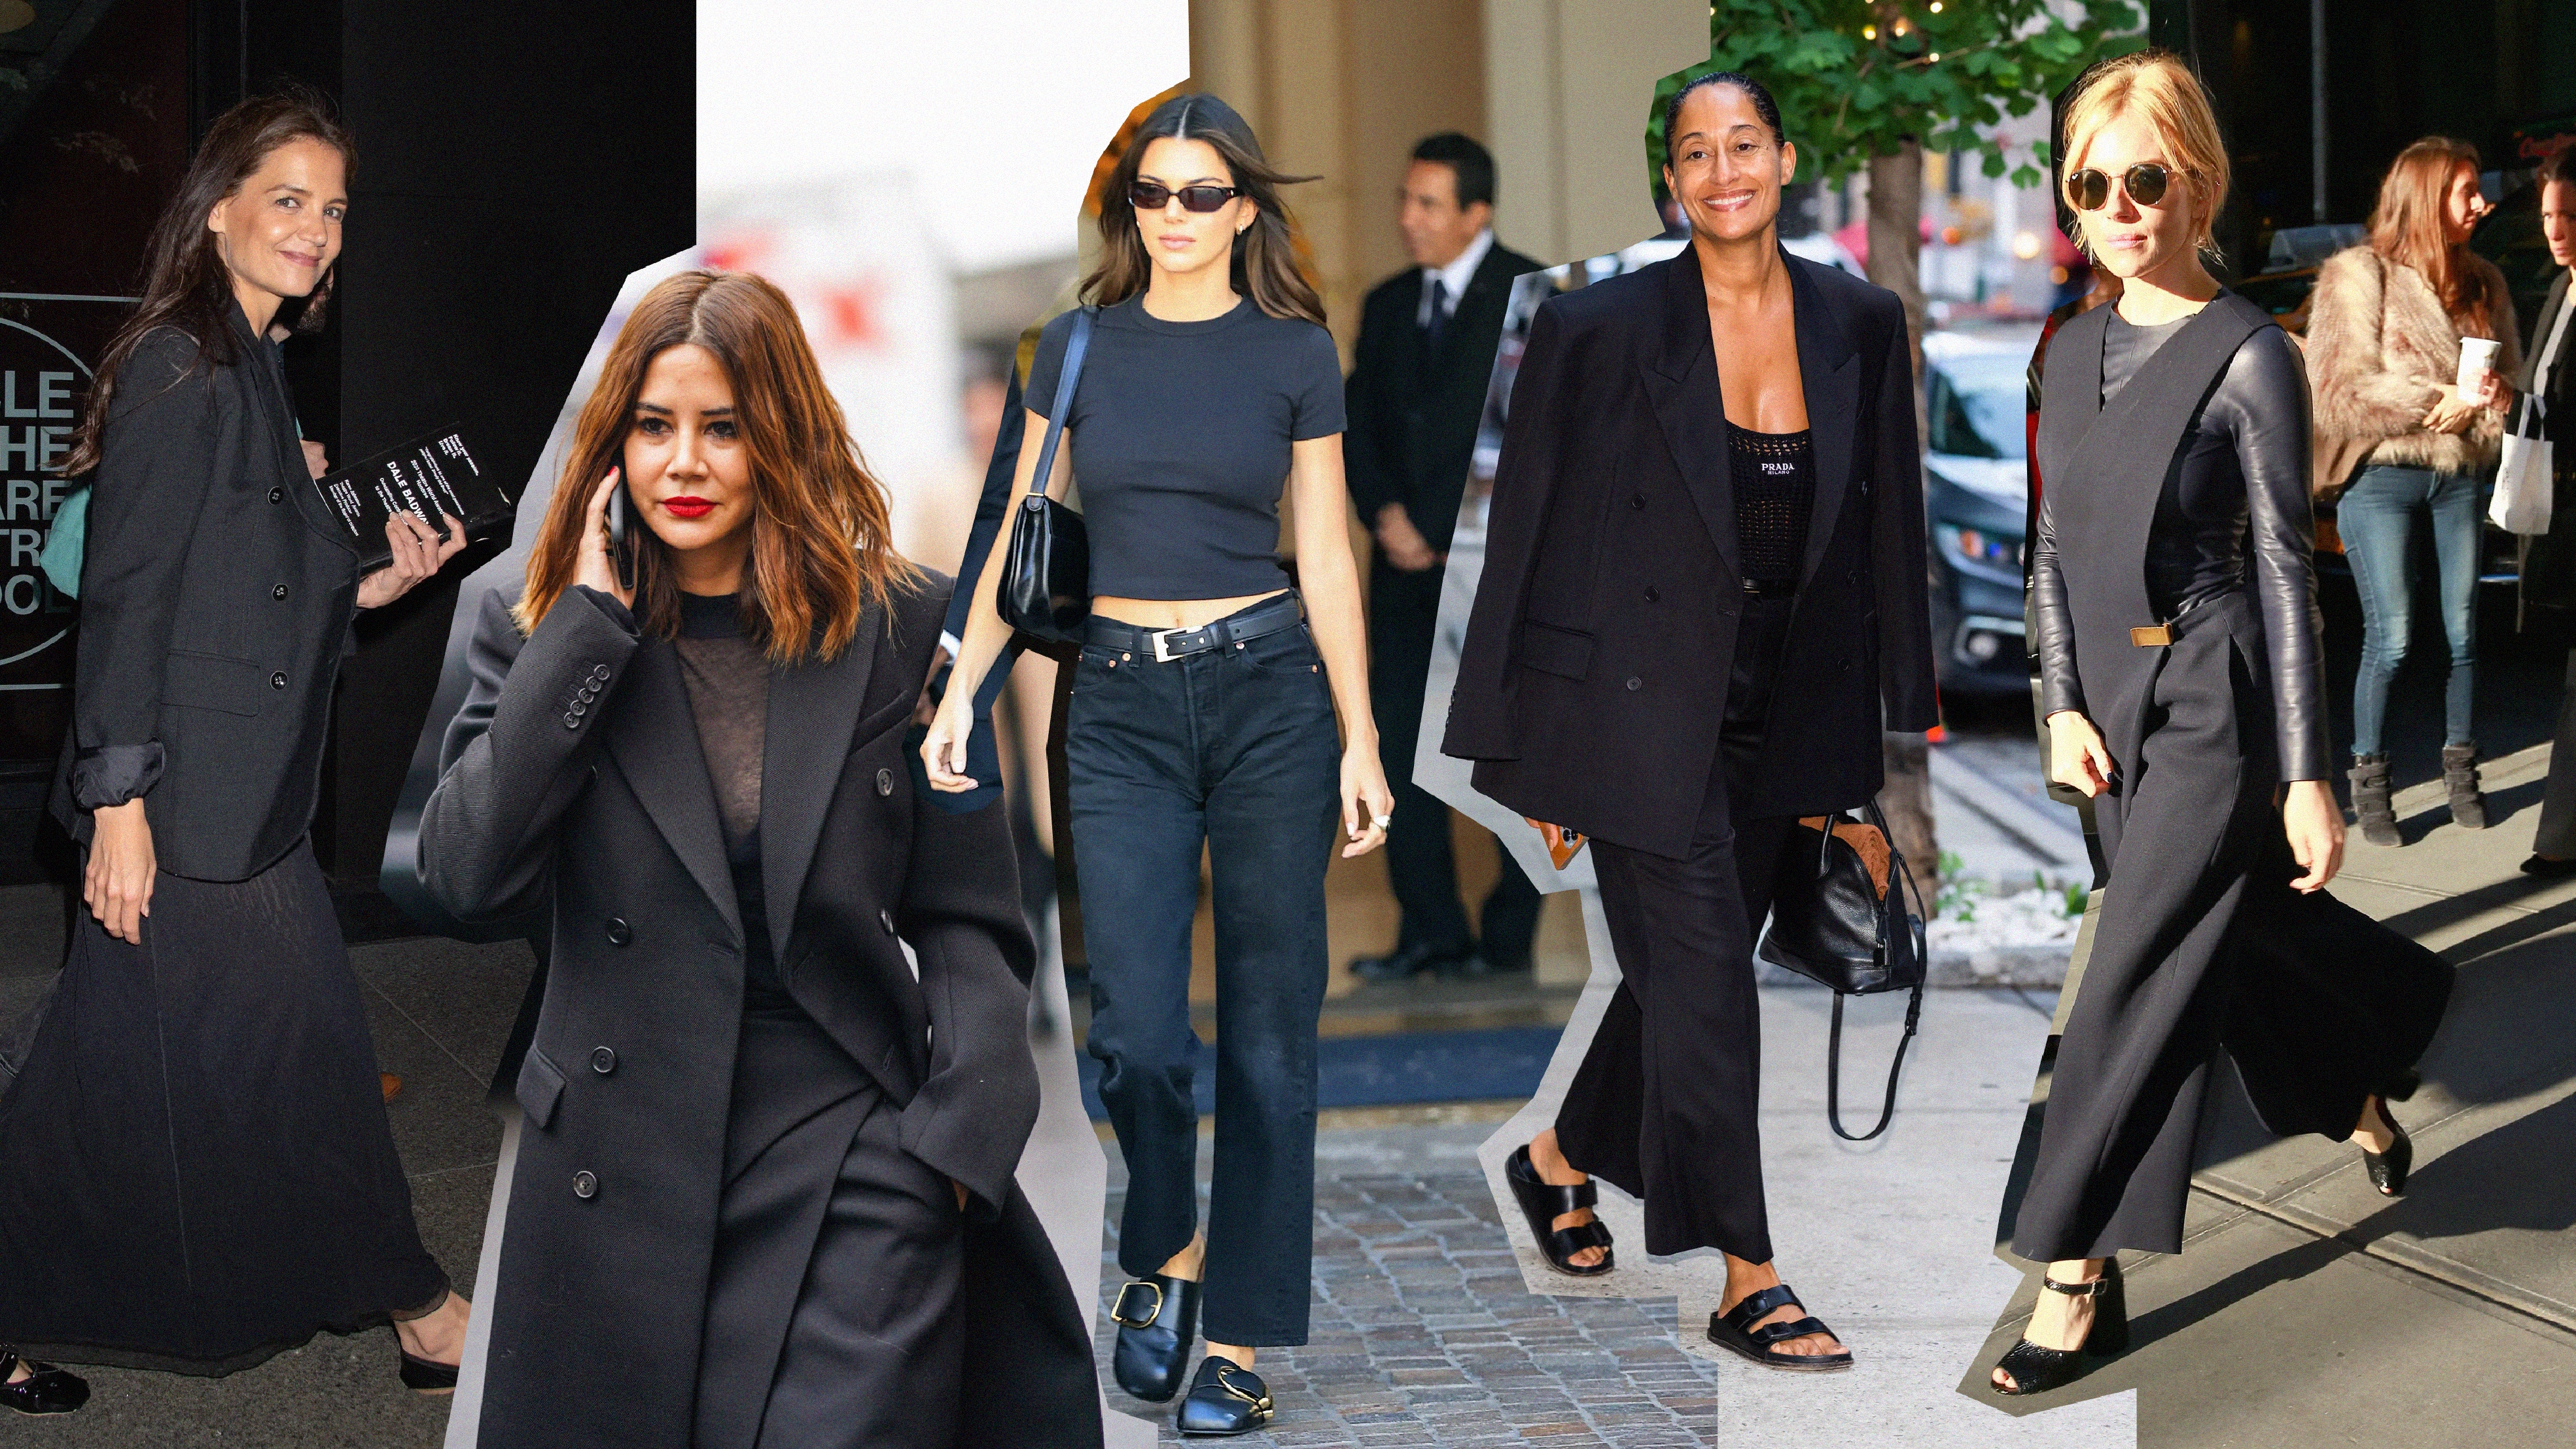 say goodbye to summer with black outfits